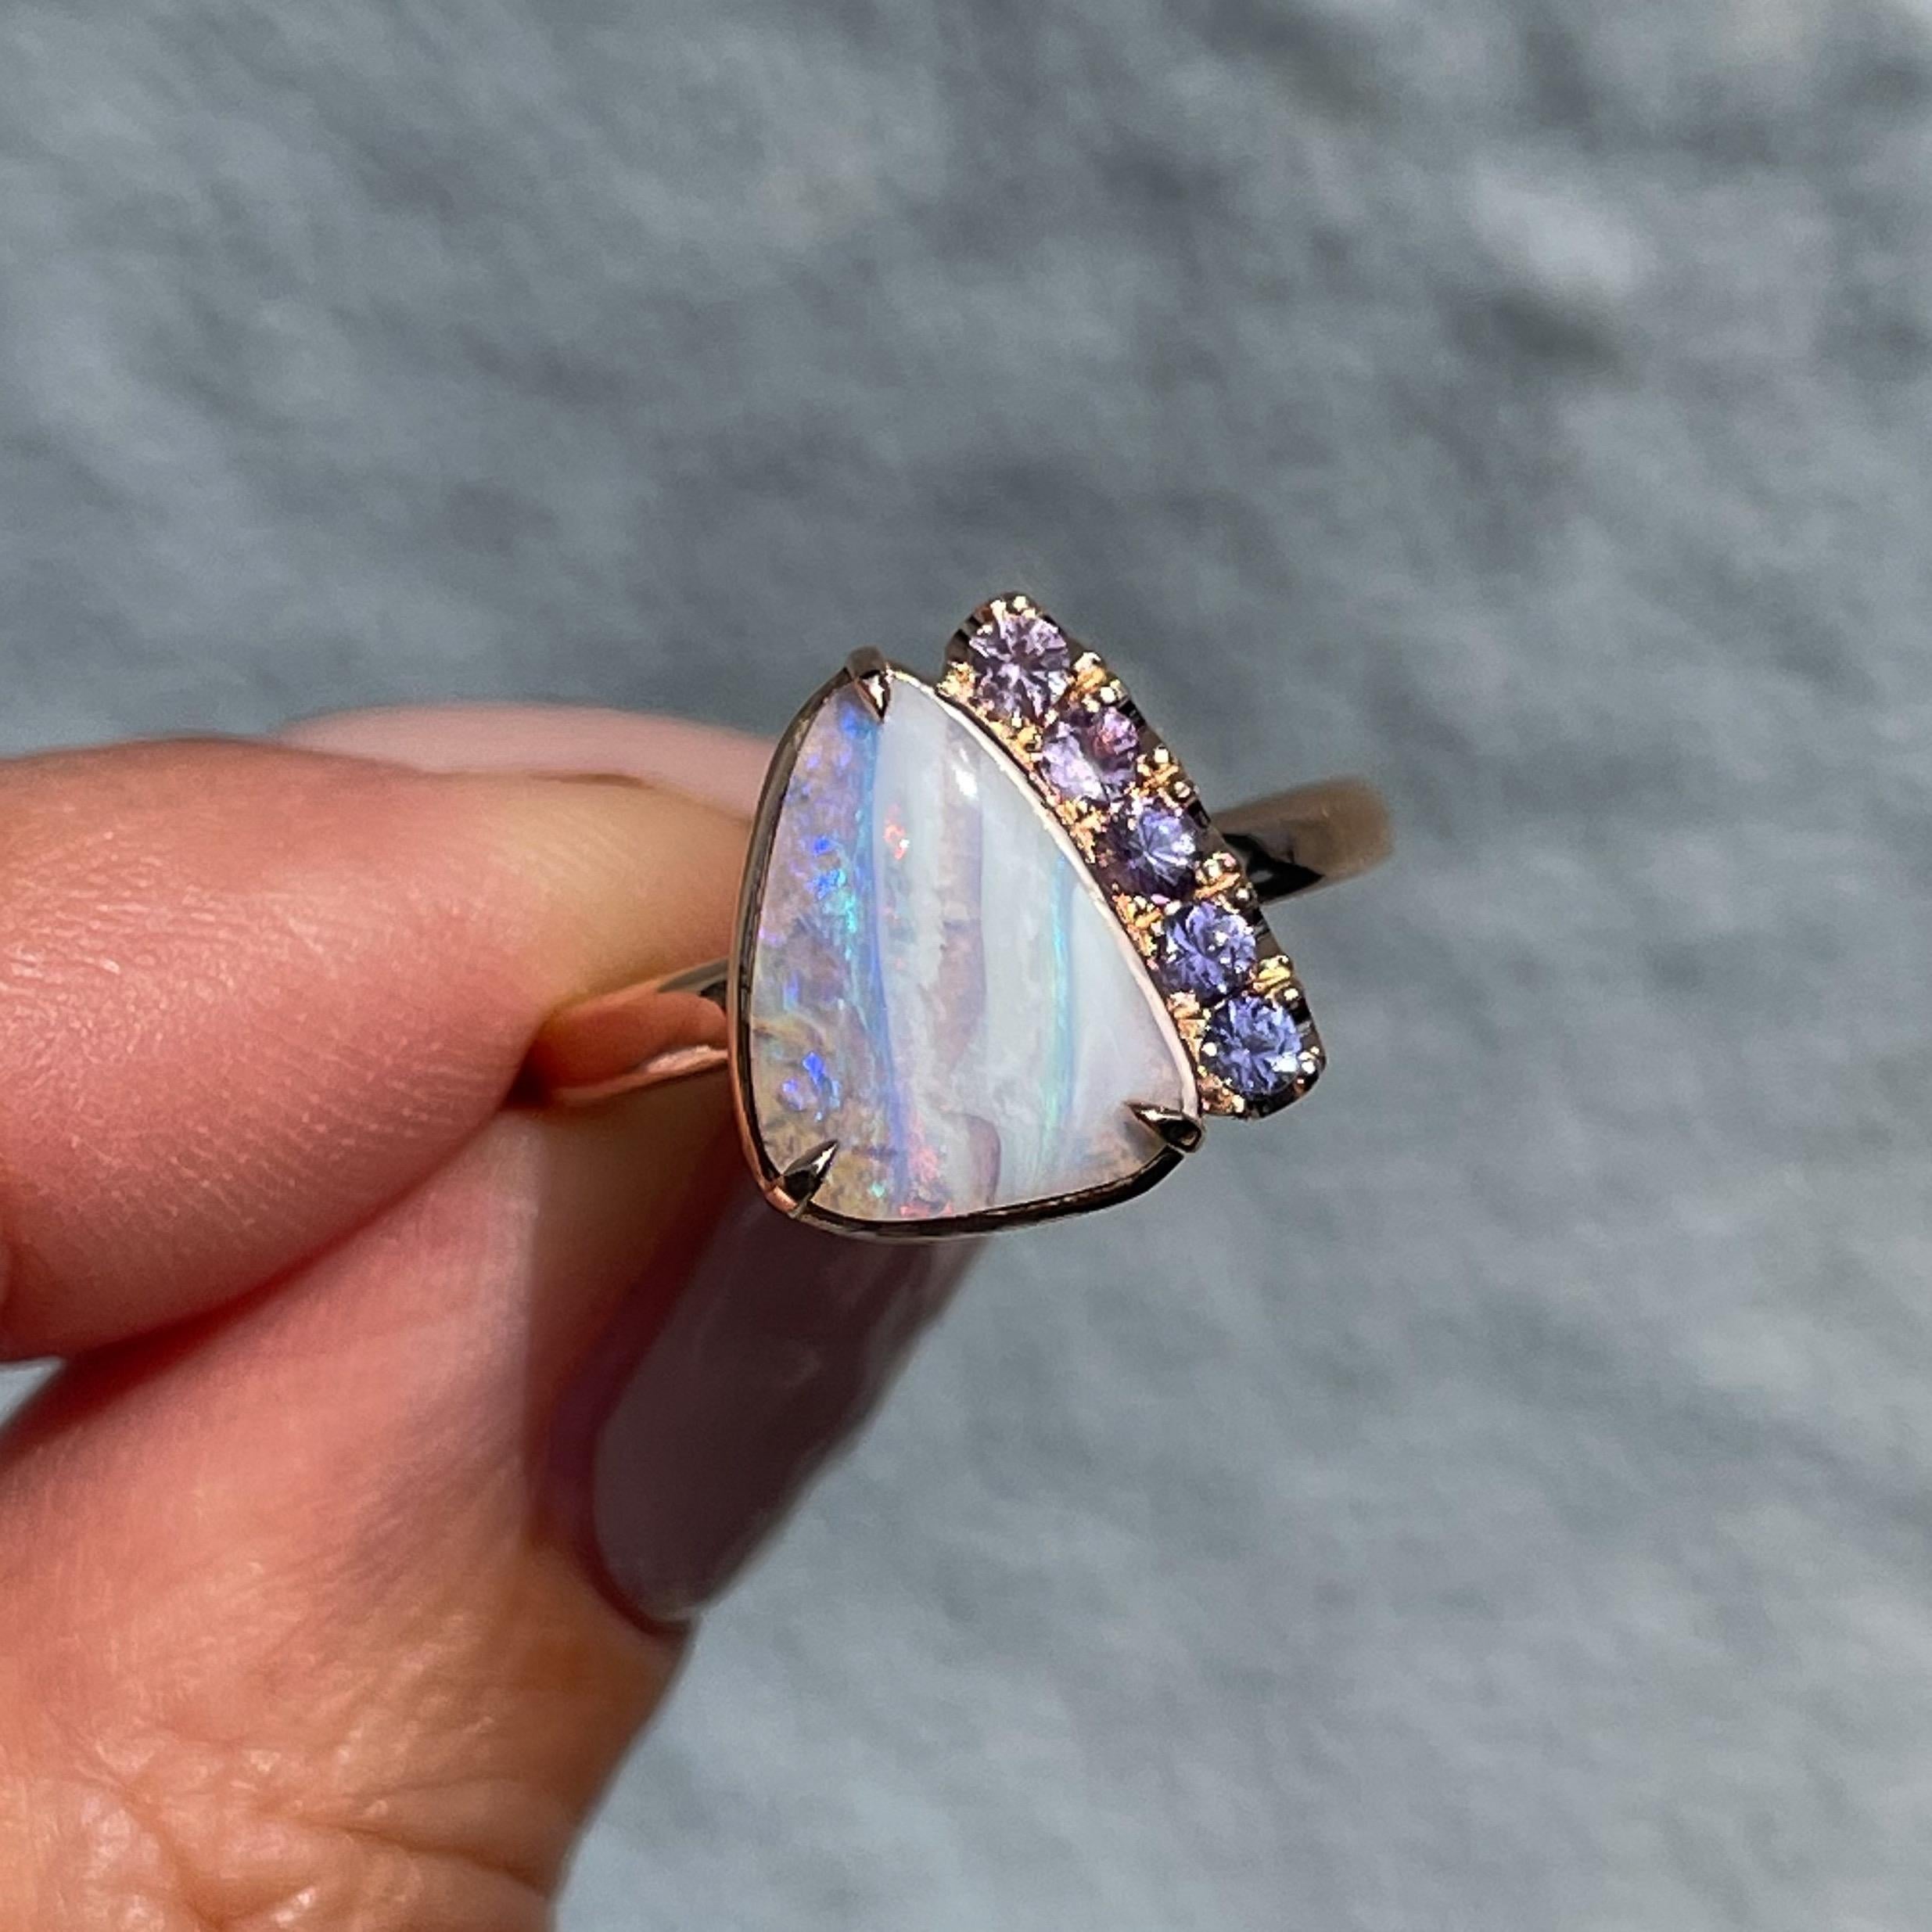 Traces of Love Australian Opal Engagement Ring in Rose Gold by NIXIN Jewelry For Sale 3